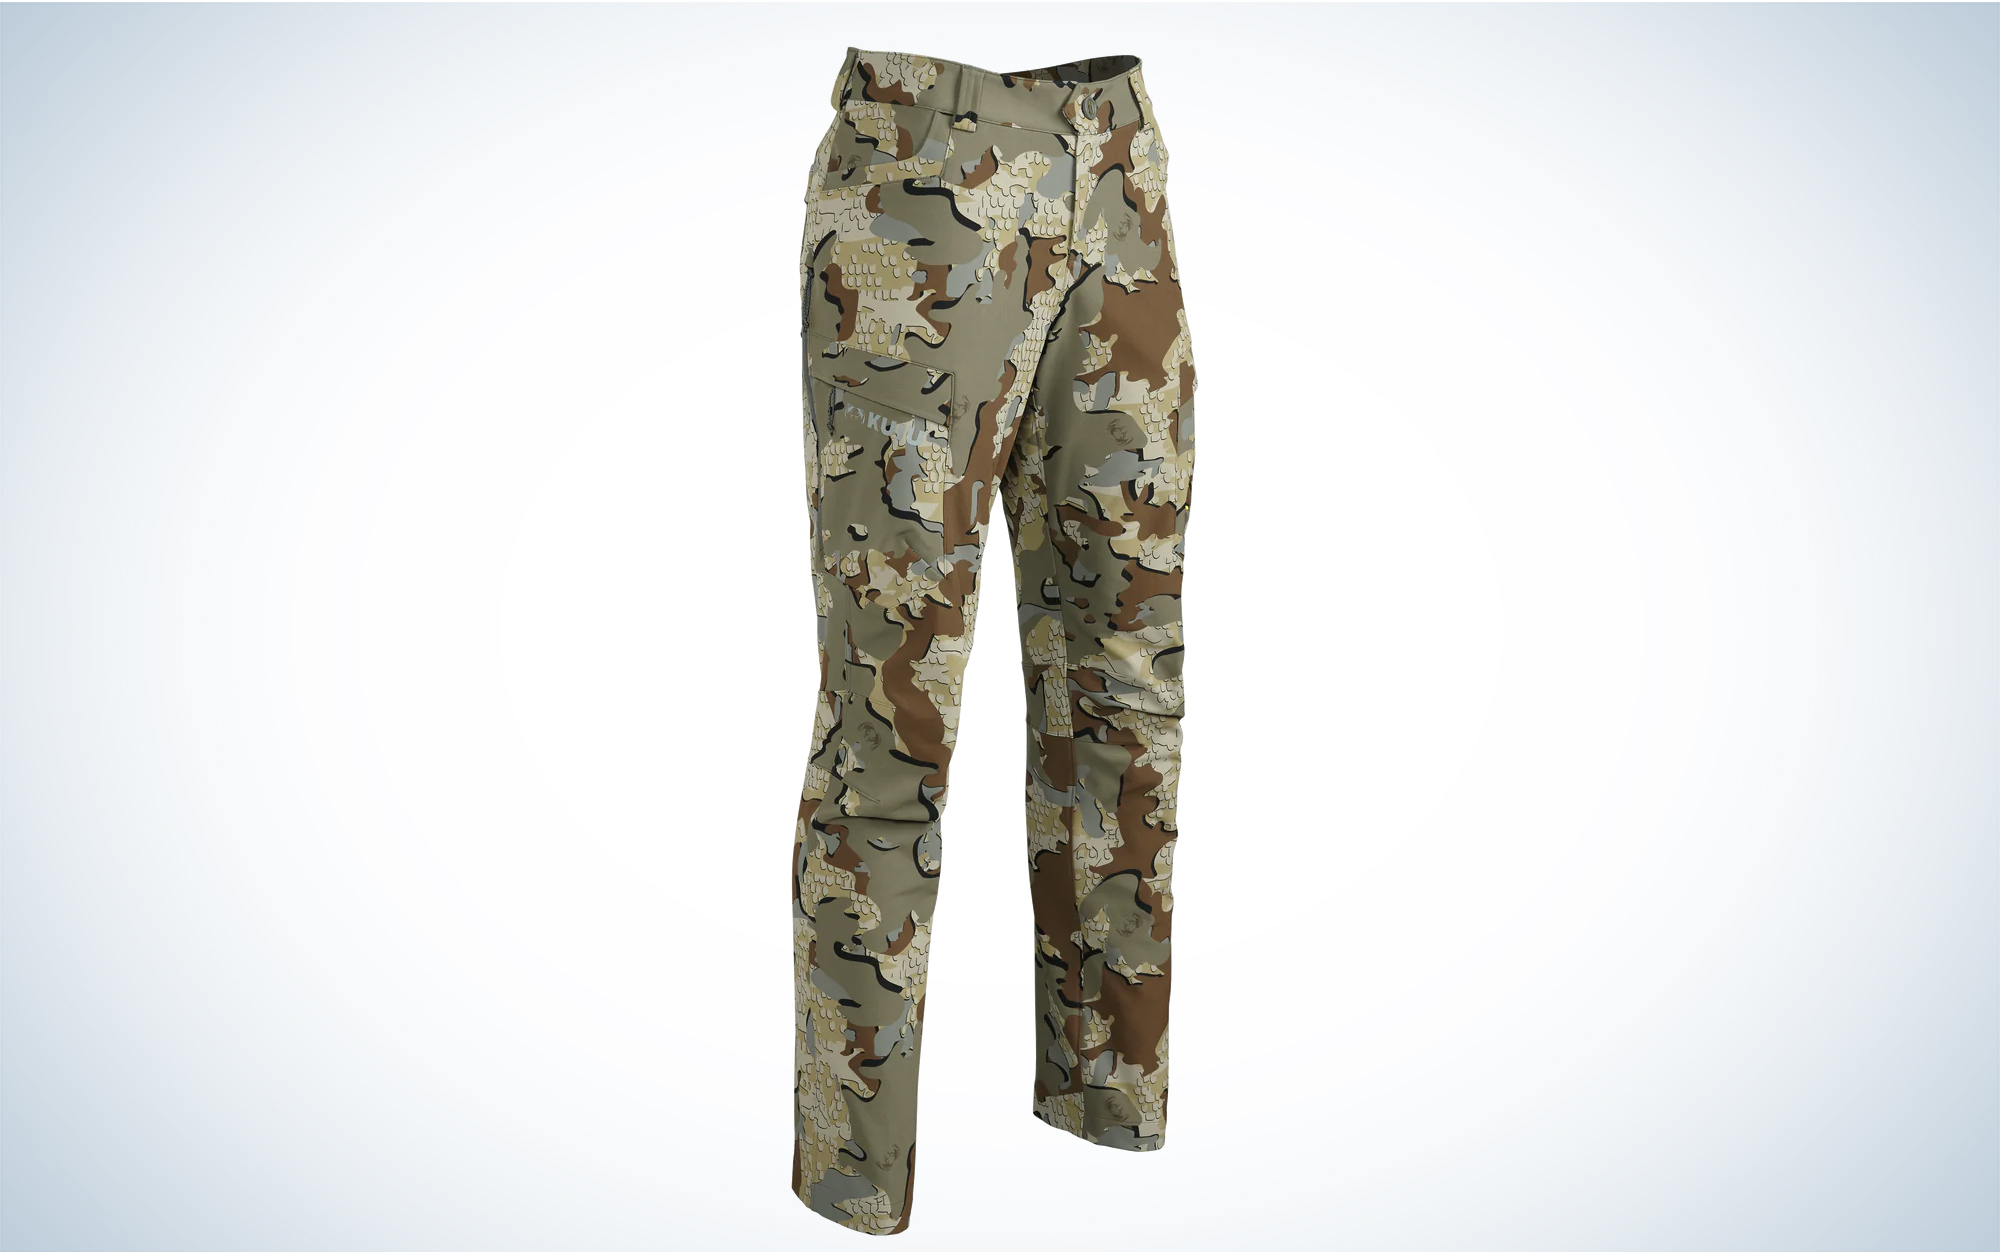 KUIU's women's attack hunting pants are shown in the Valo camouflage pattern.